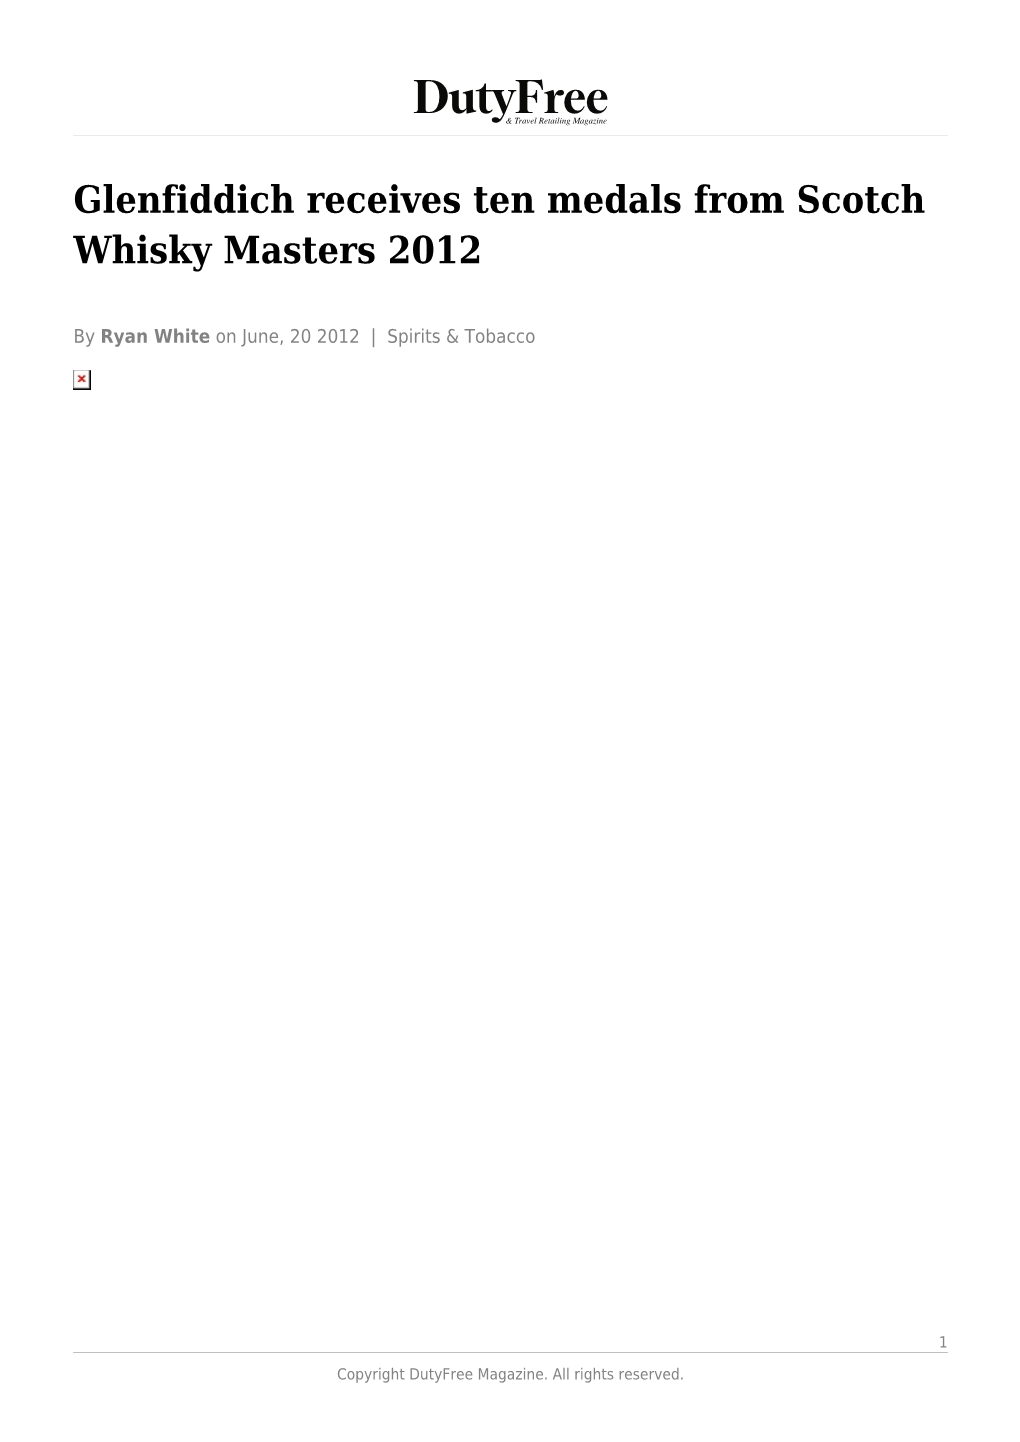 Glenfiddich Receives Ten Medals from Scotch Whisky Masters 2012